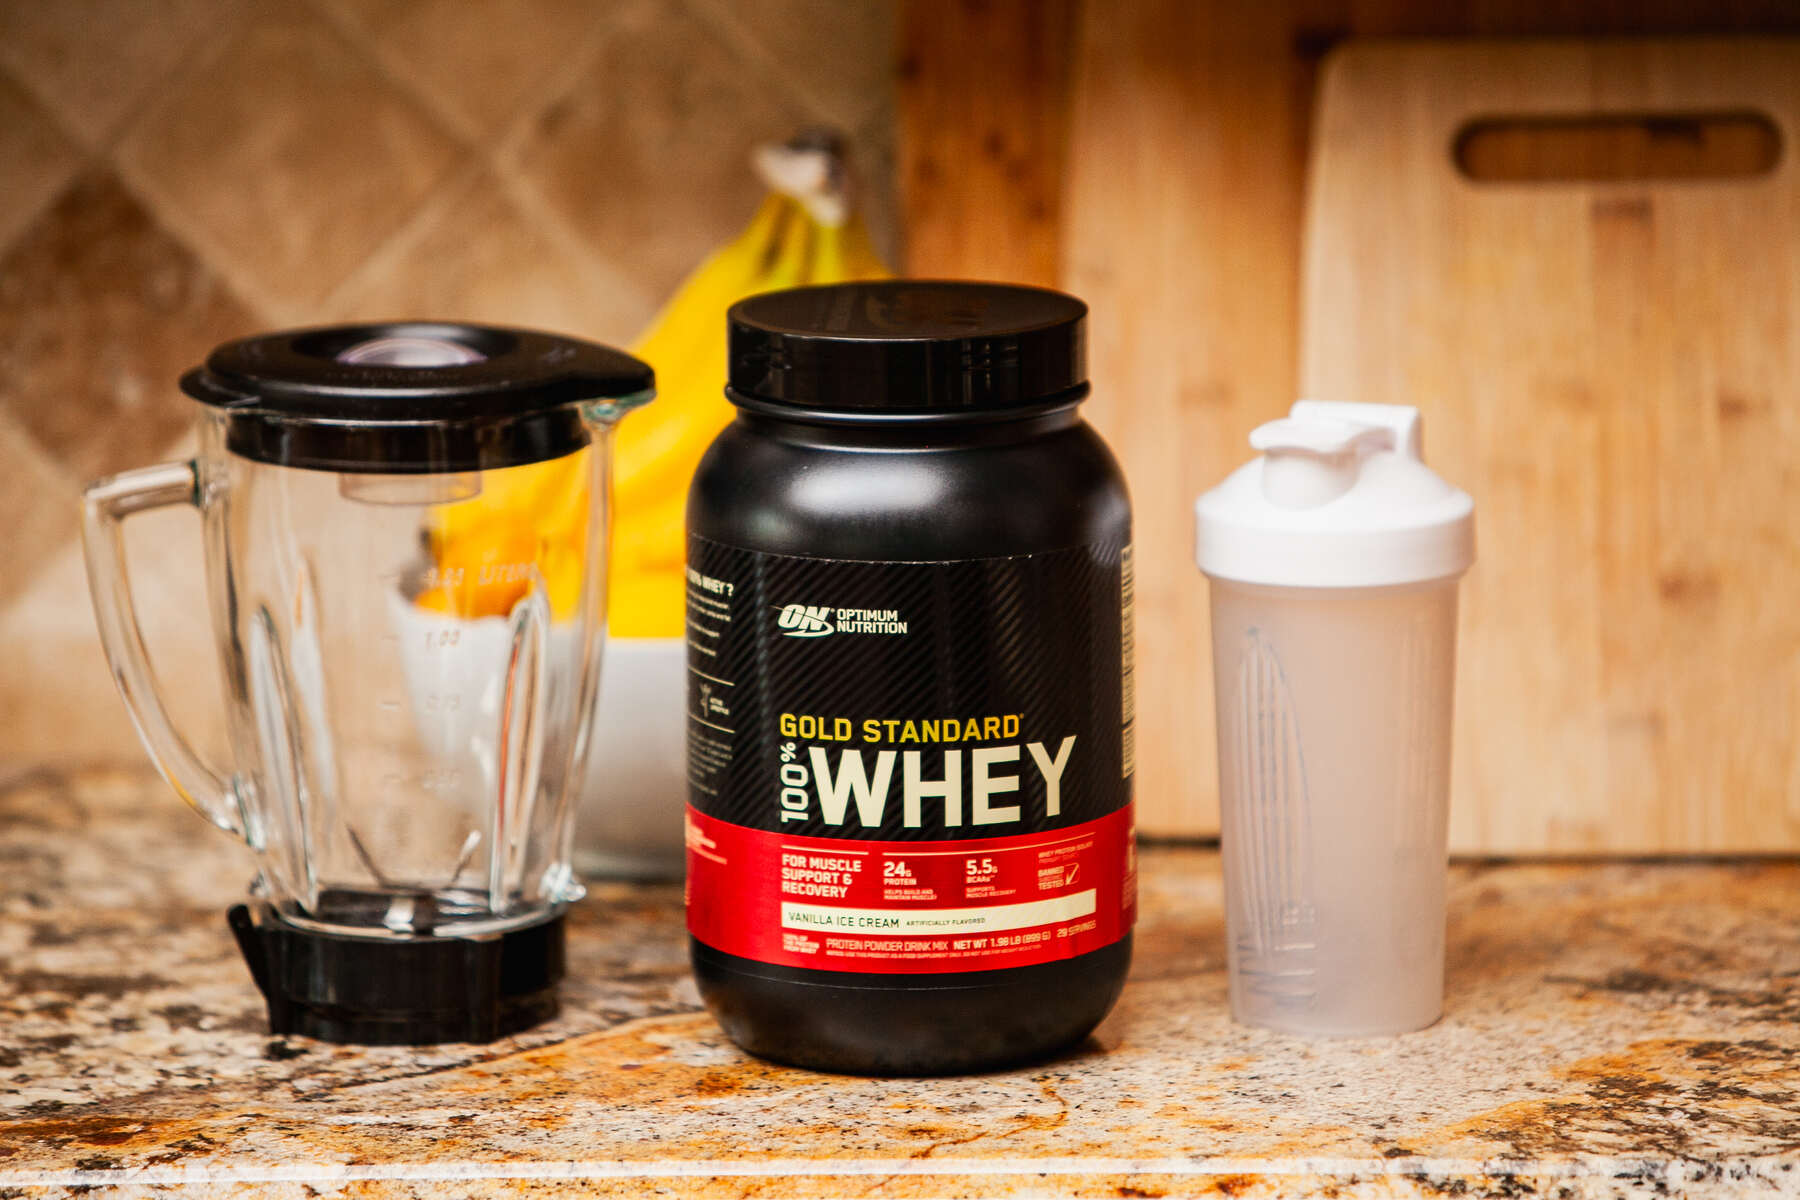 A clear blender, a black and red labeled Gold Standard Whey Protein container, and a white protein shaker on a granite countertop